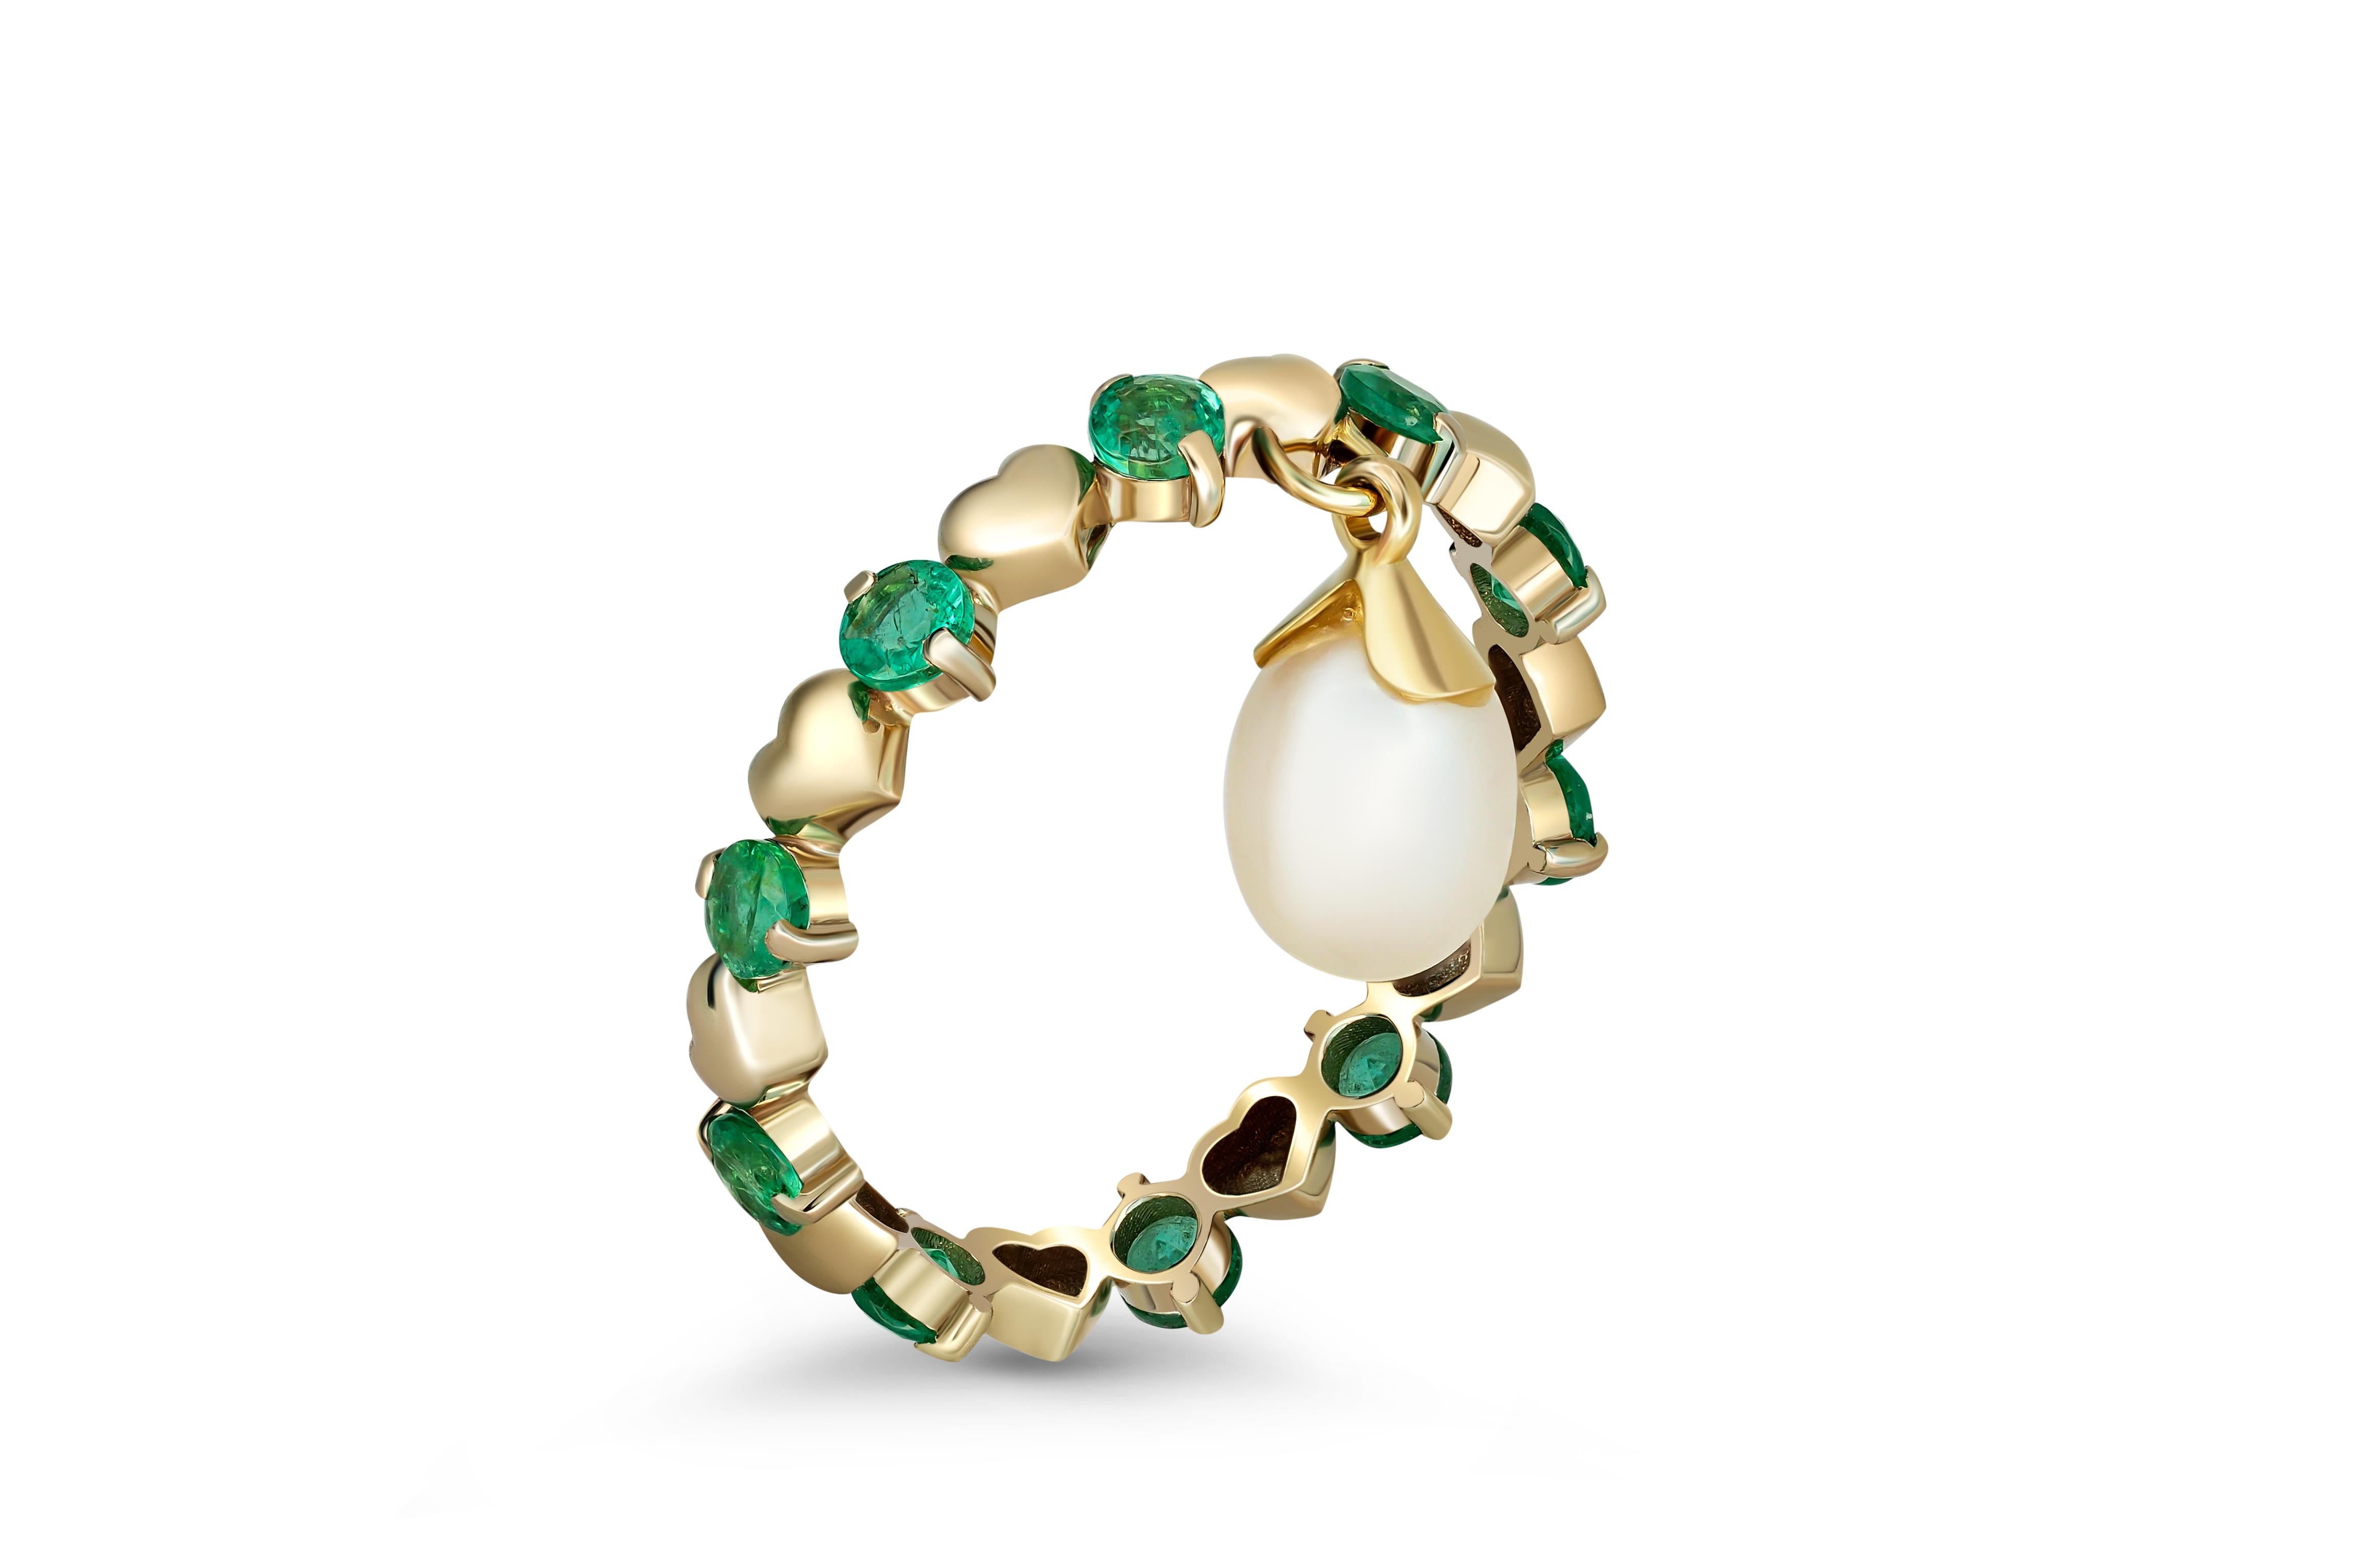 14 Karat Gold Eternity Ring with Emeralds and Pearl. Emerald eternity ring